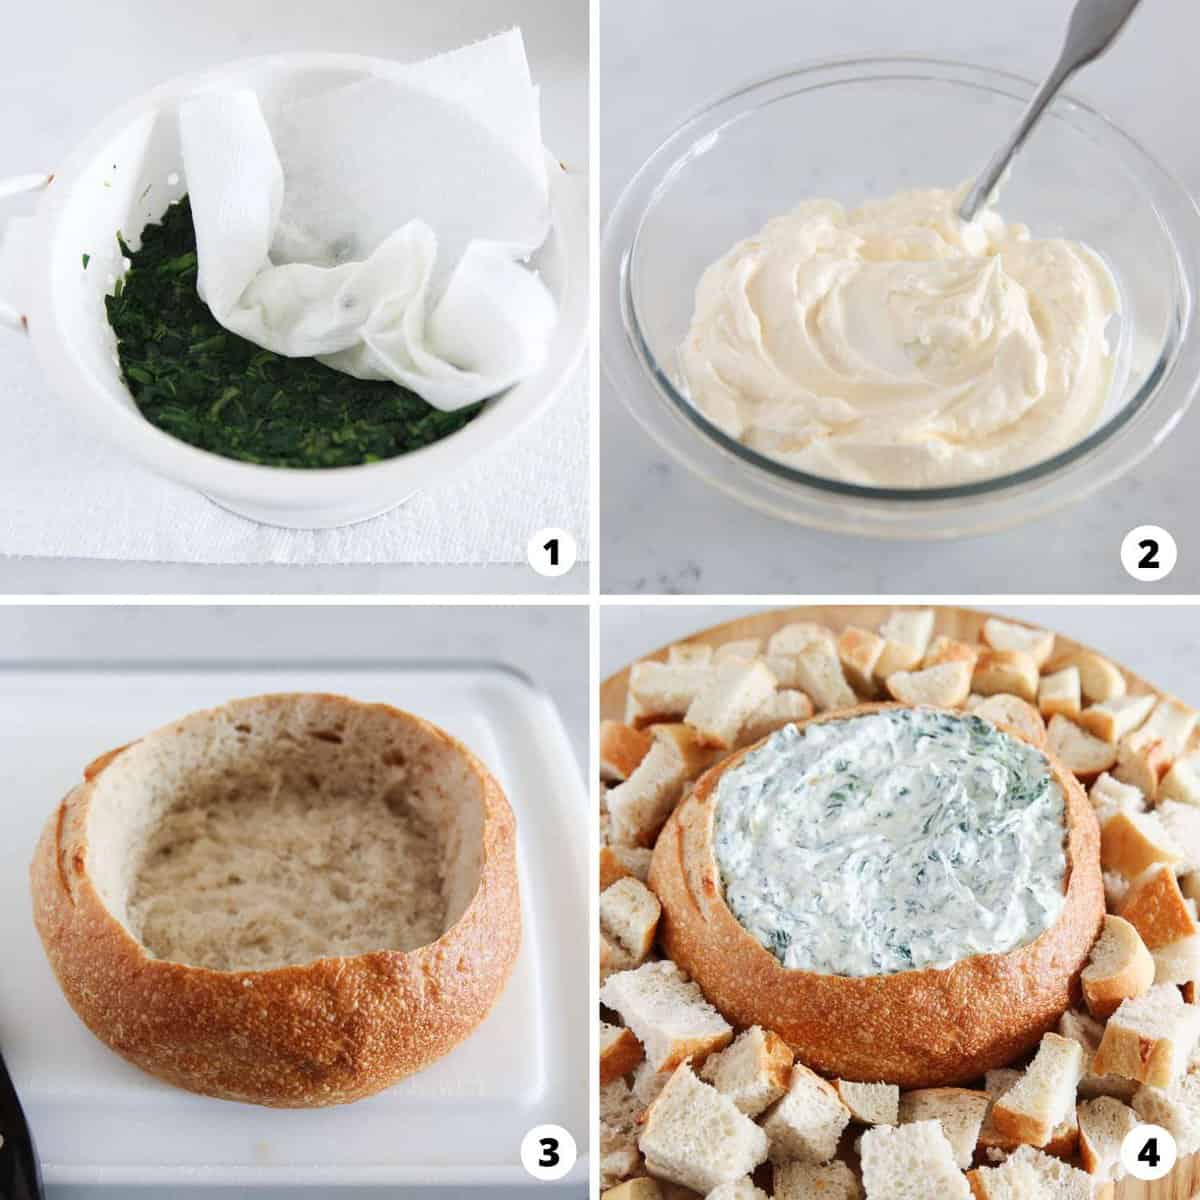 Showing how to make Knorr spinach dip in a 4 step collage.